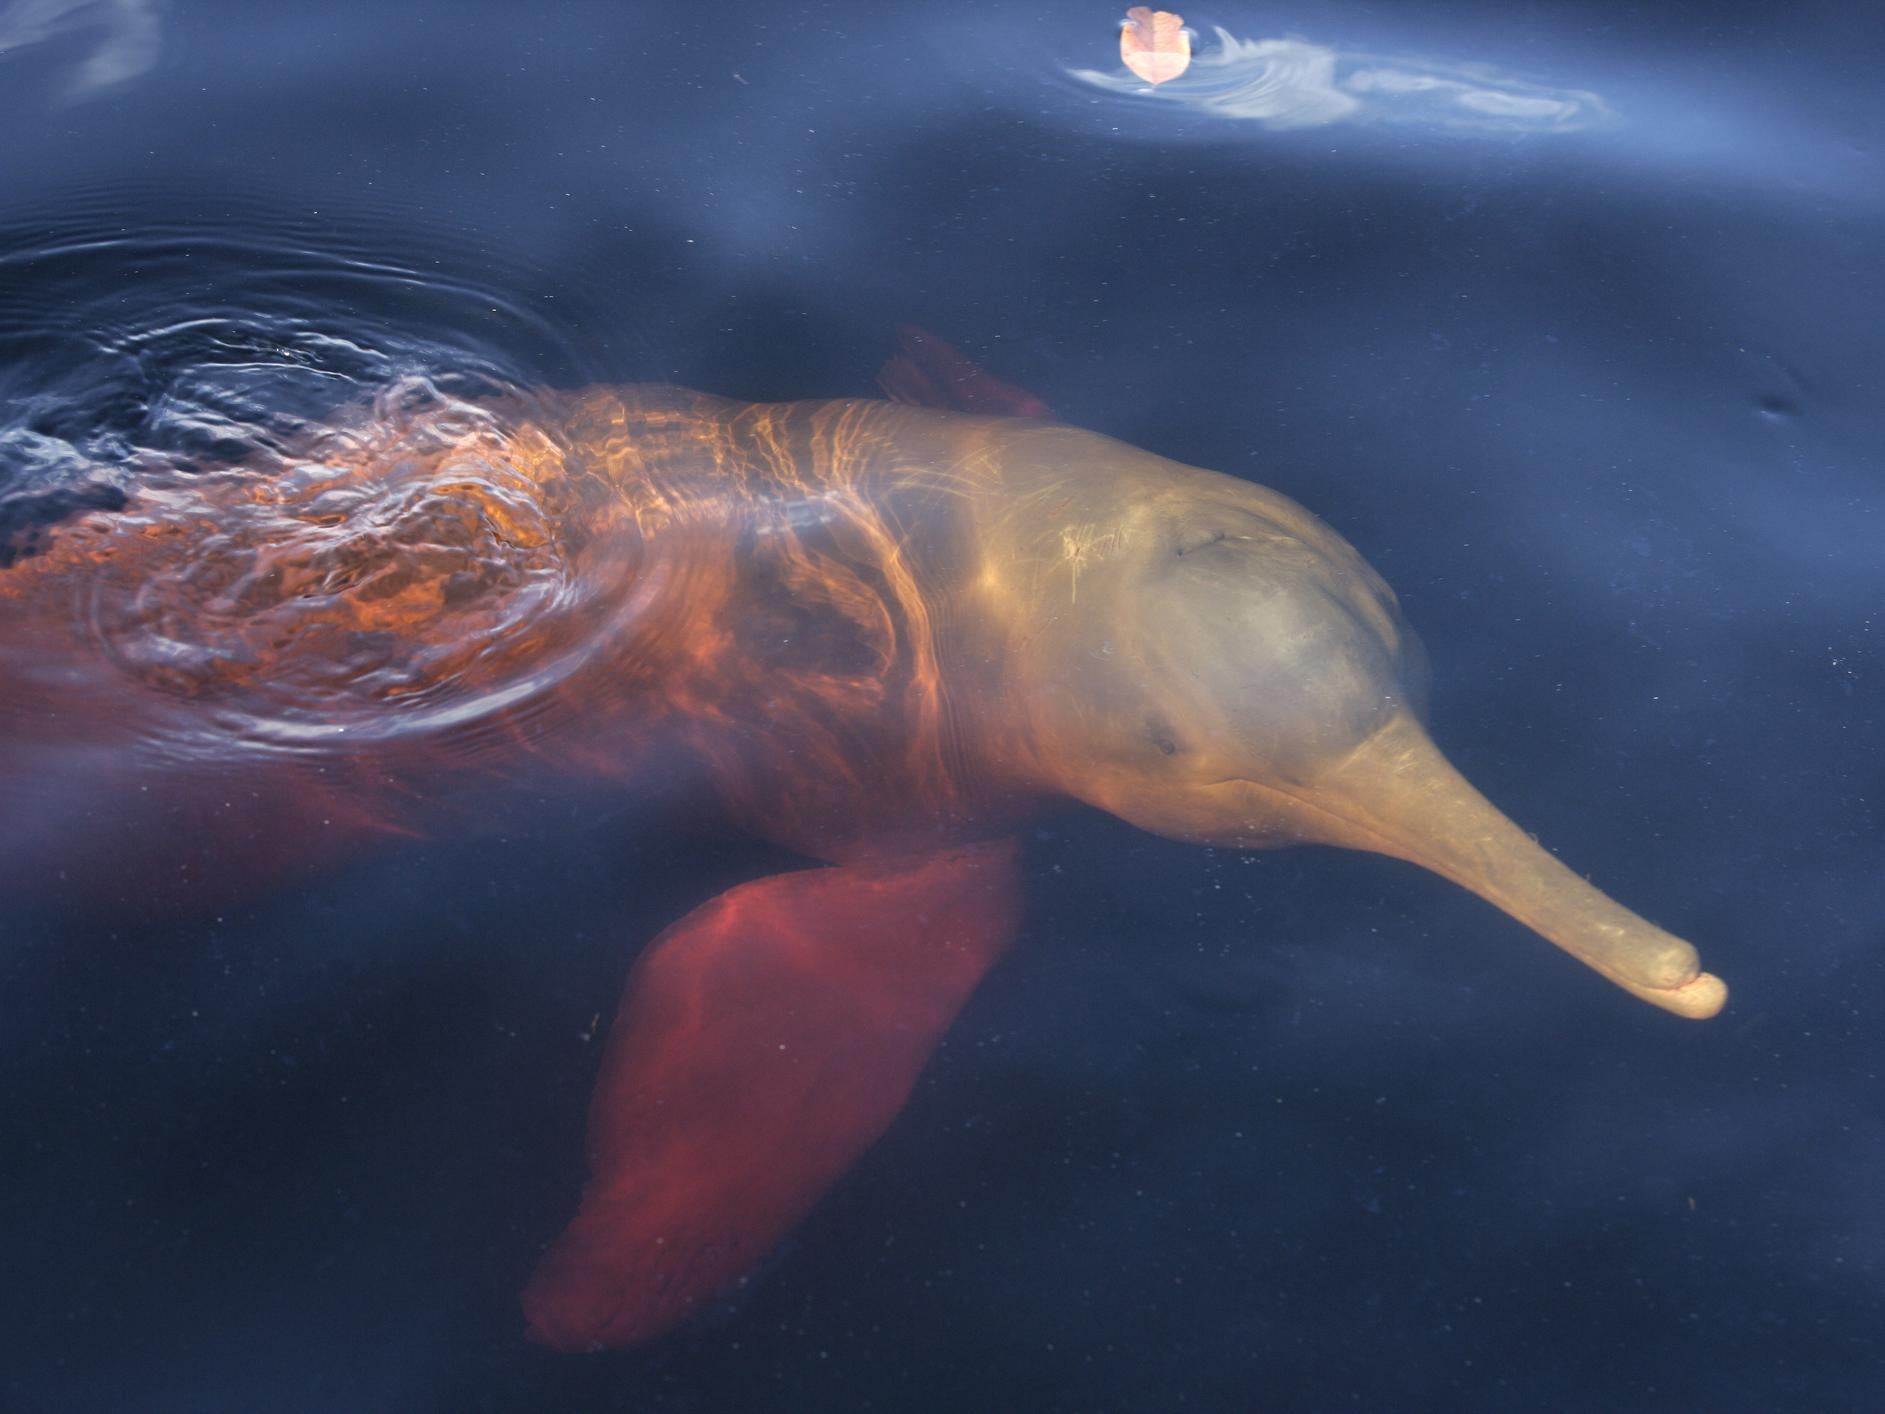 Amazon river dolphins, known as botos, are particularly targeted for slaughter